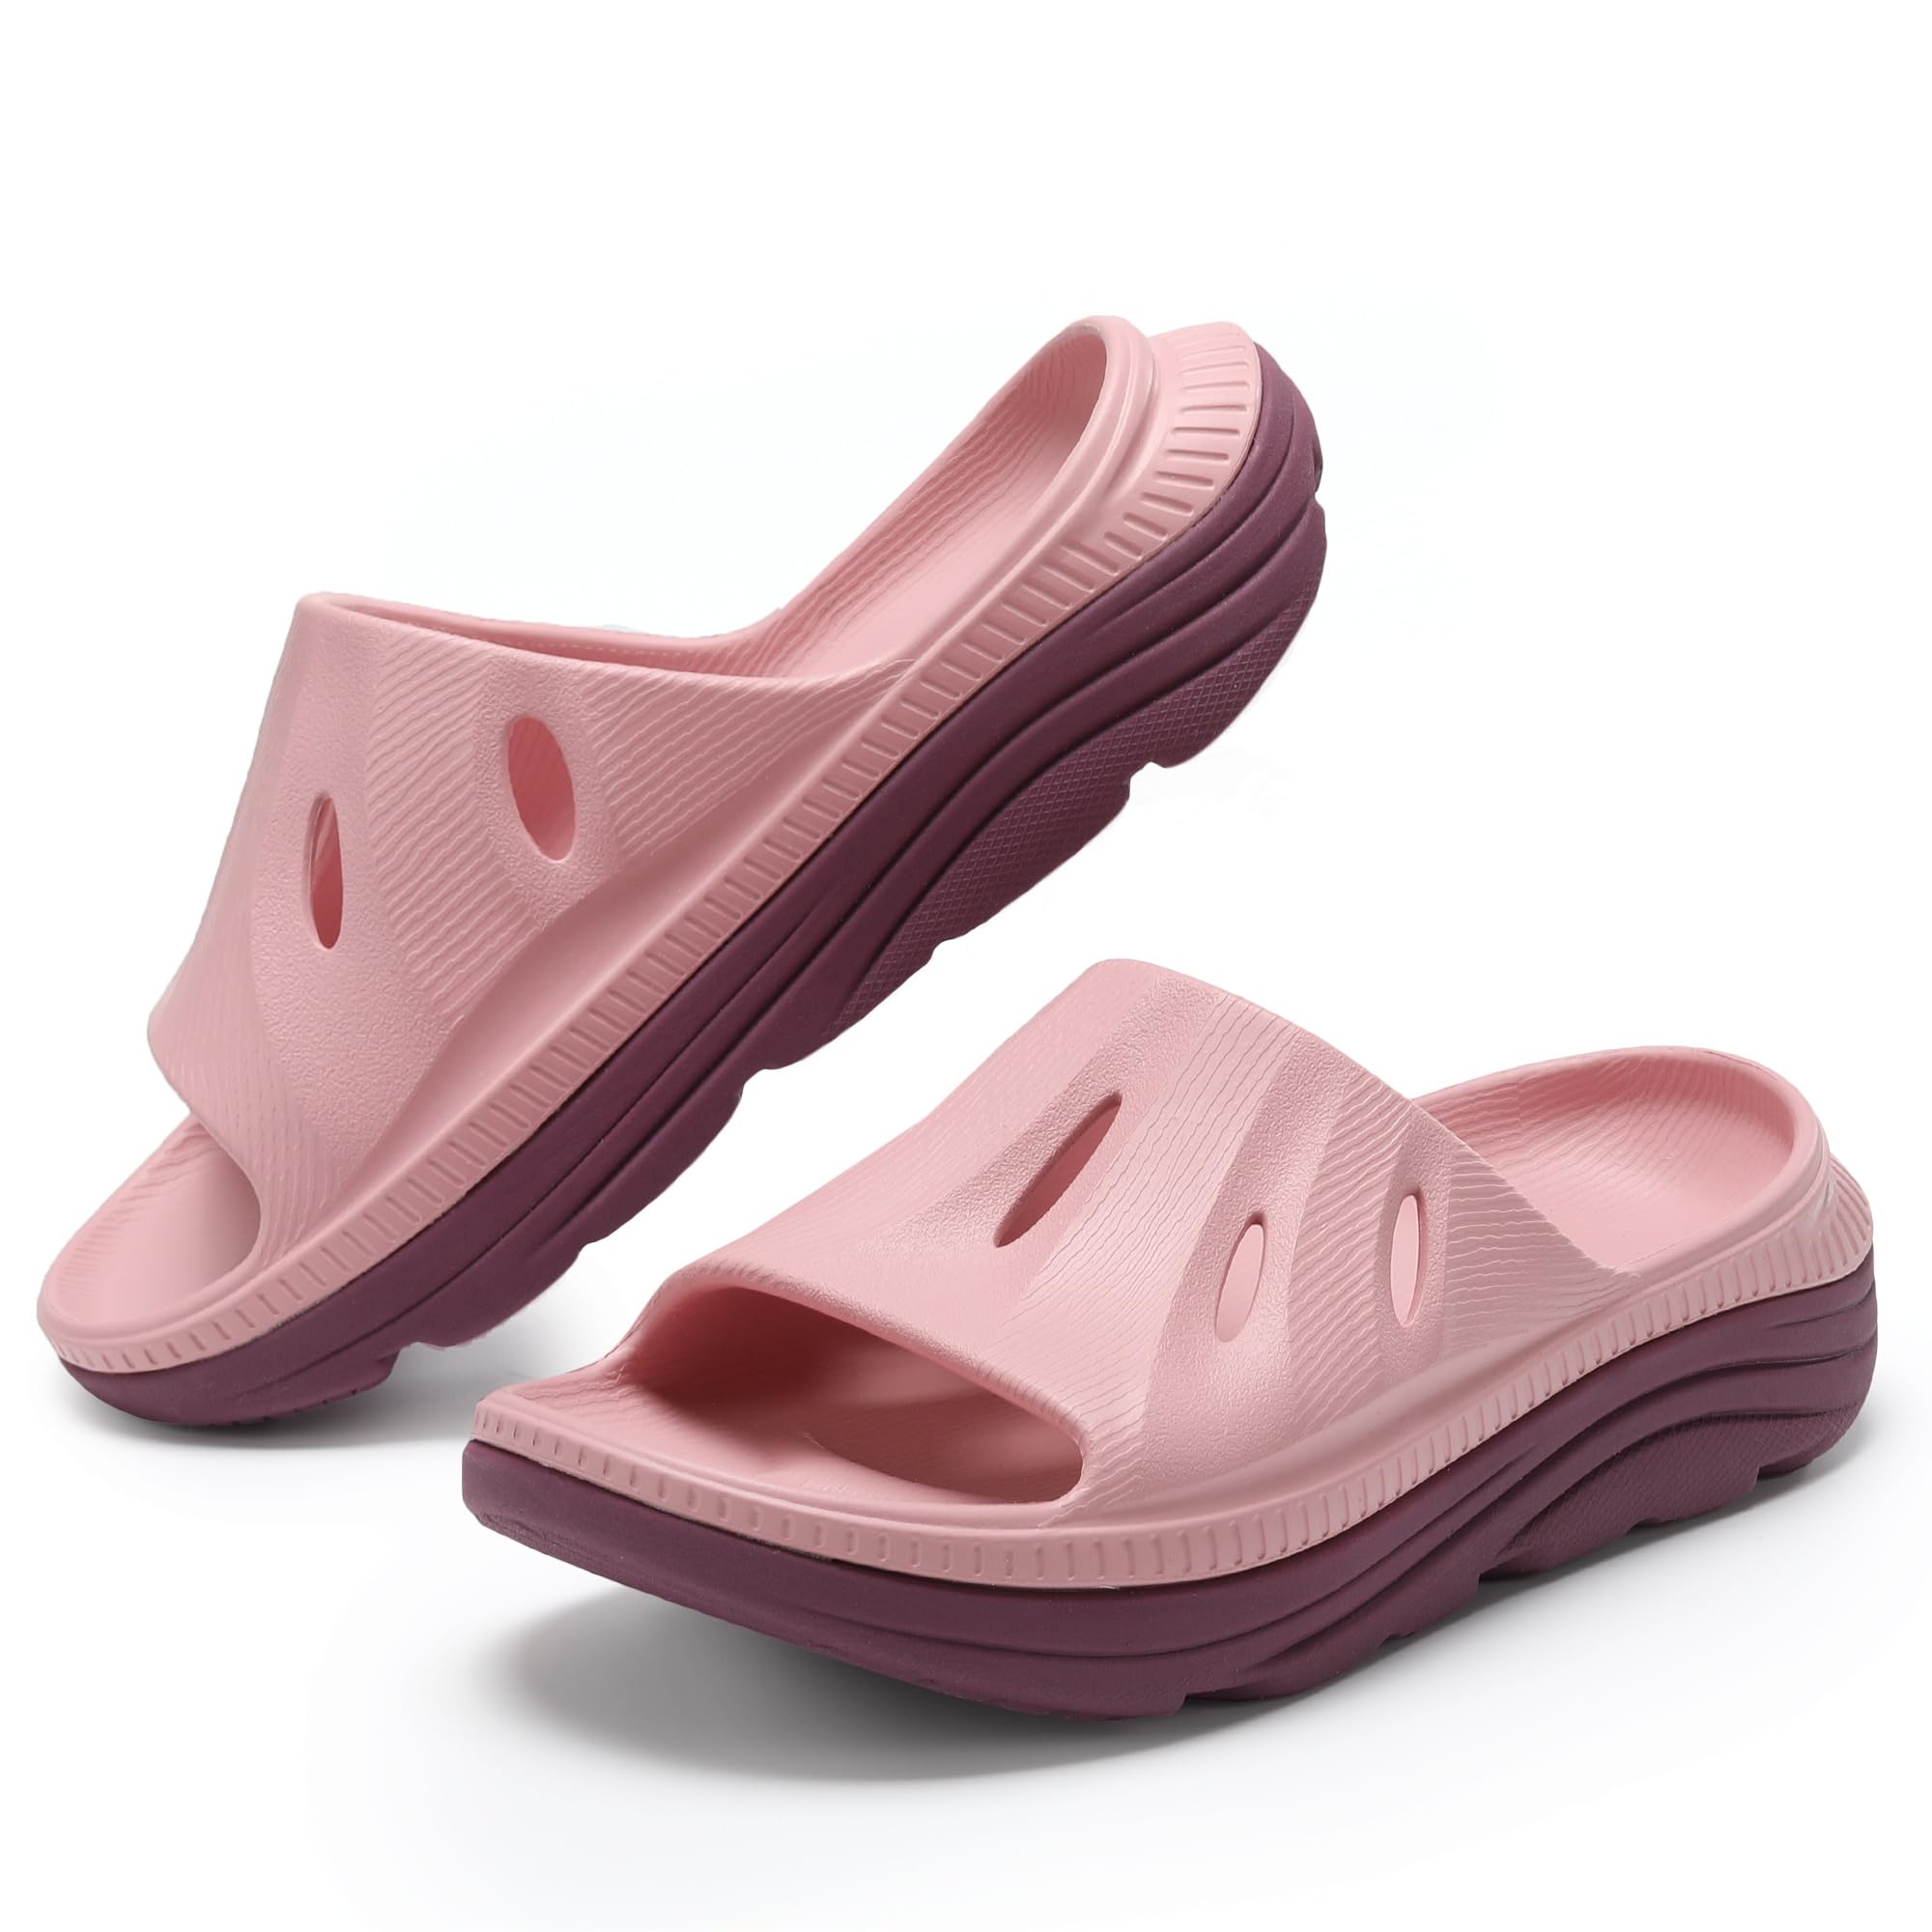 NPNYSY Womens Recovery Sandals Comfortable Athletic Slides Thick Cushion Lightweight Plantar Fasciitis Sport Sliders of Indoor Outdoor,Arch Support Orthotic Open Toe Reduces Feet Joints Stress